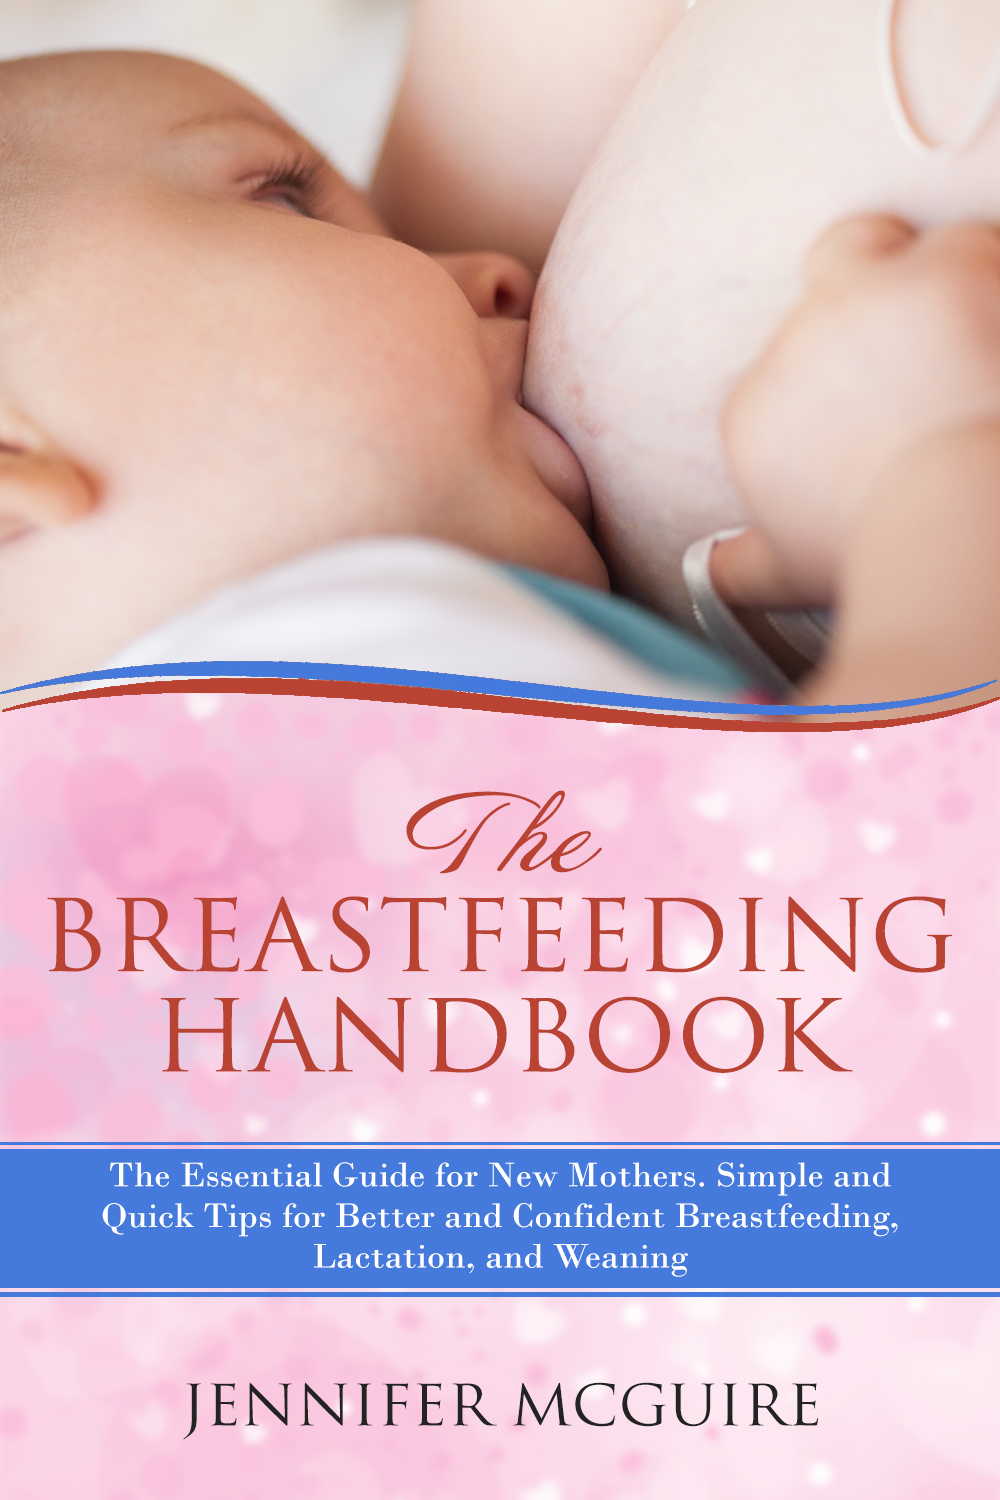 FREE: The Breastfeeding Handbook: The Essential Guide for New Mothers: Simple and Quick Tips for Better and Confident Breastfeeding, Lactation, and Weaning by Jennifer McGuire